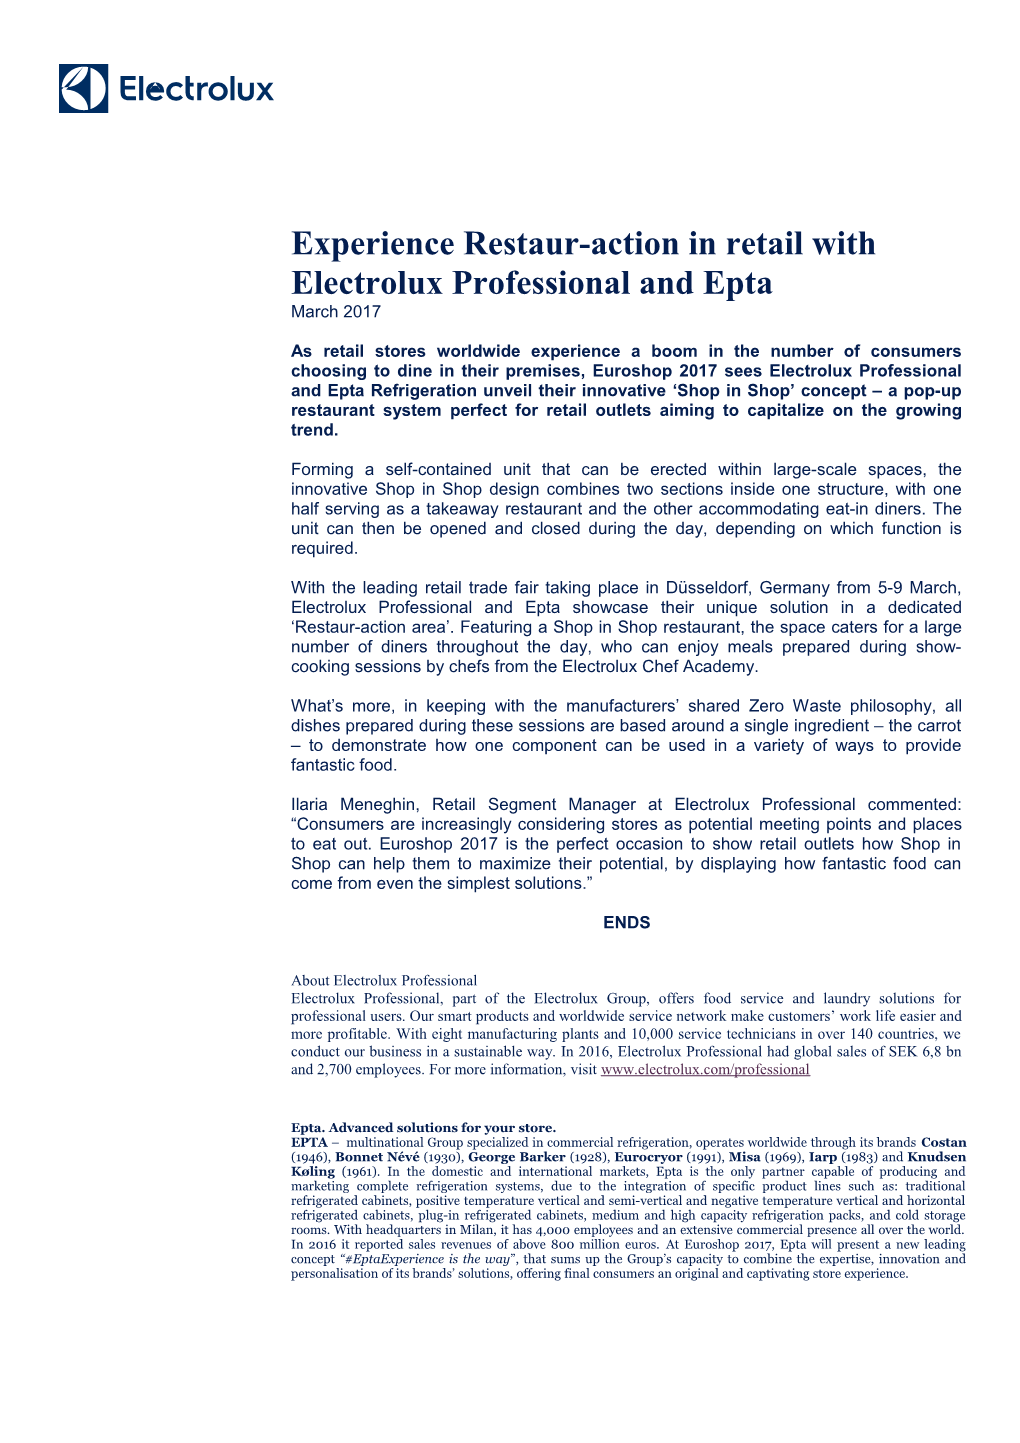 Experience Restaur-Action in Retail with Electrolux Professional and Epta